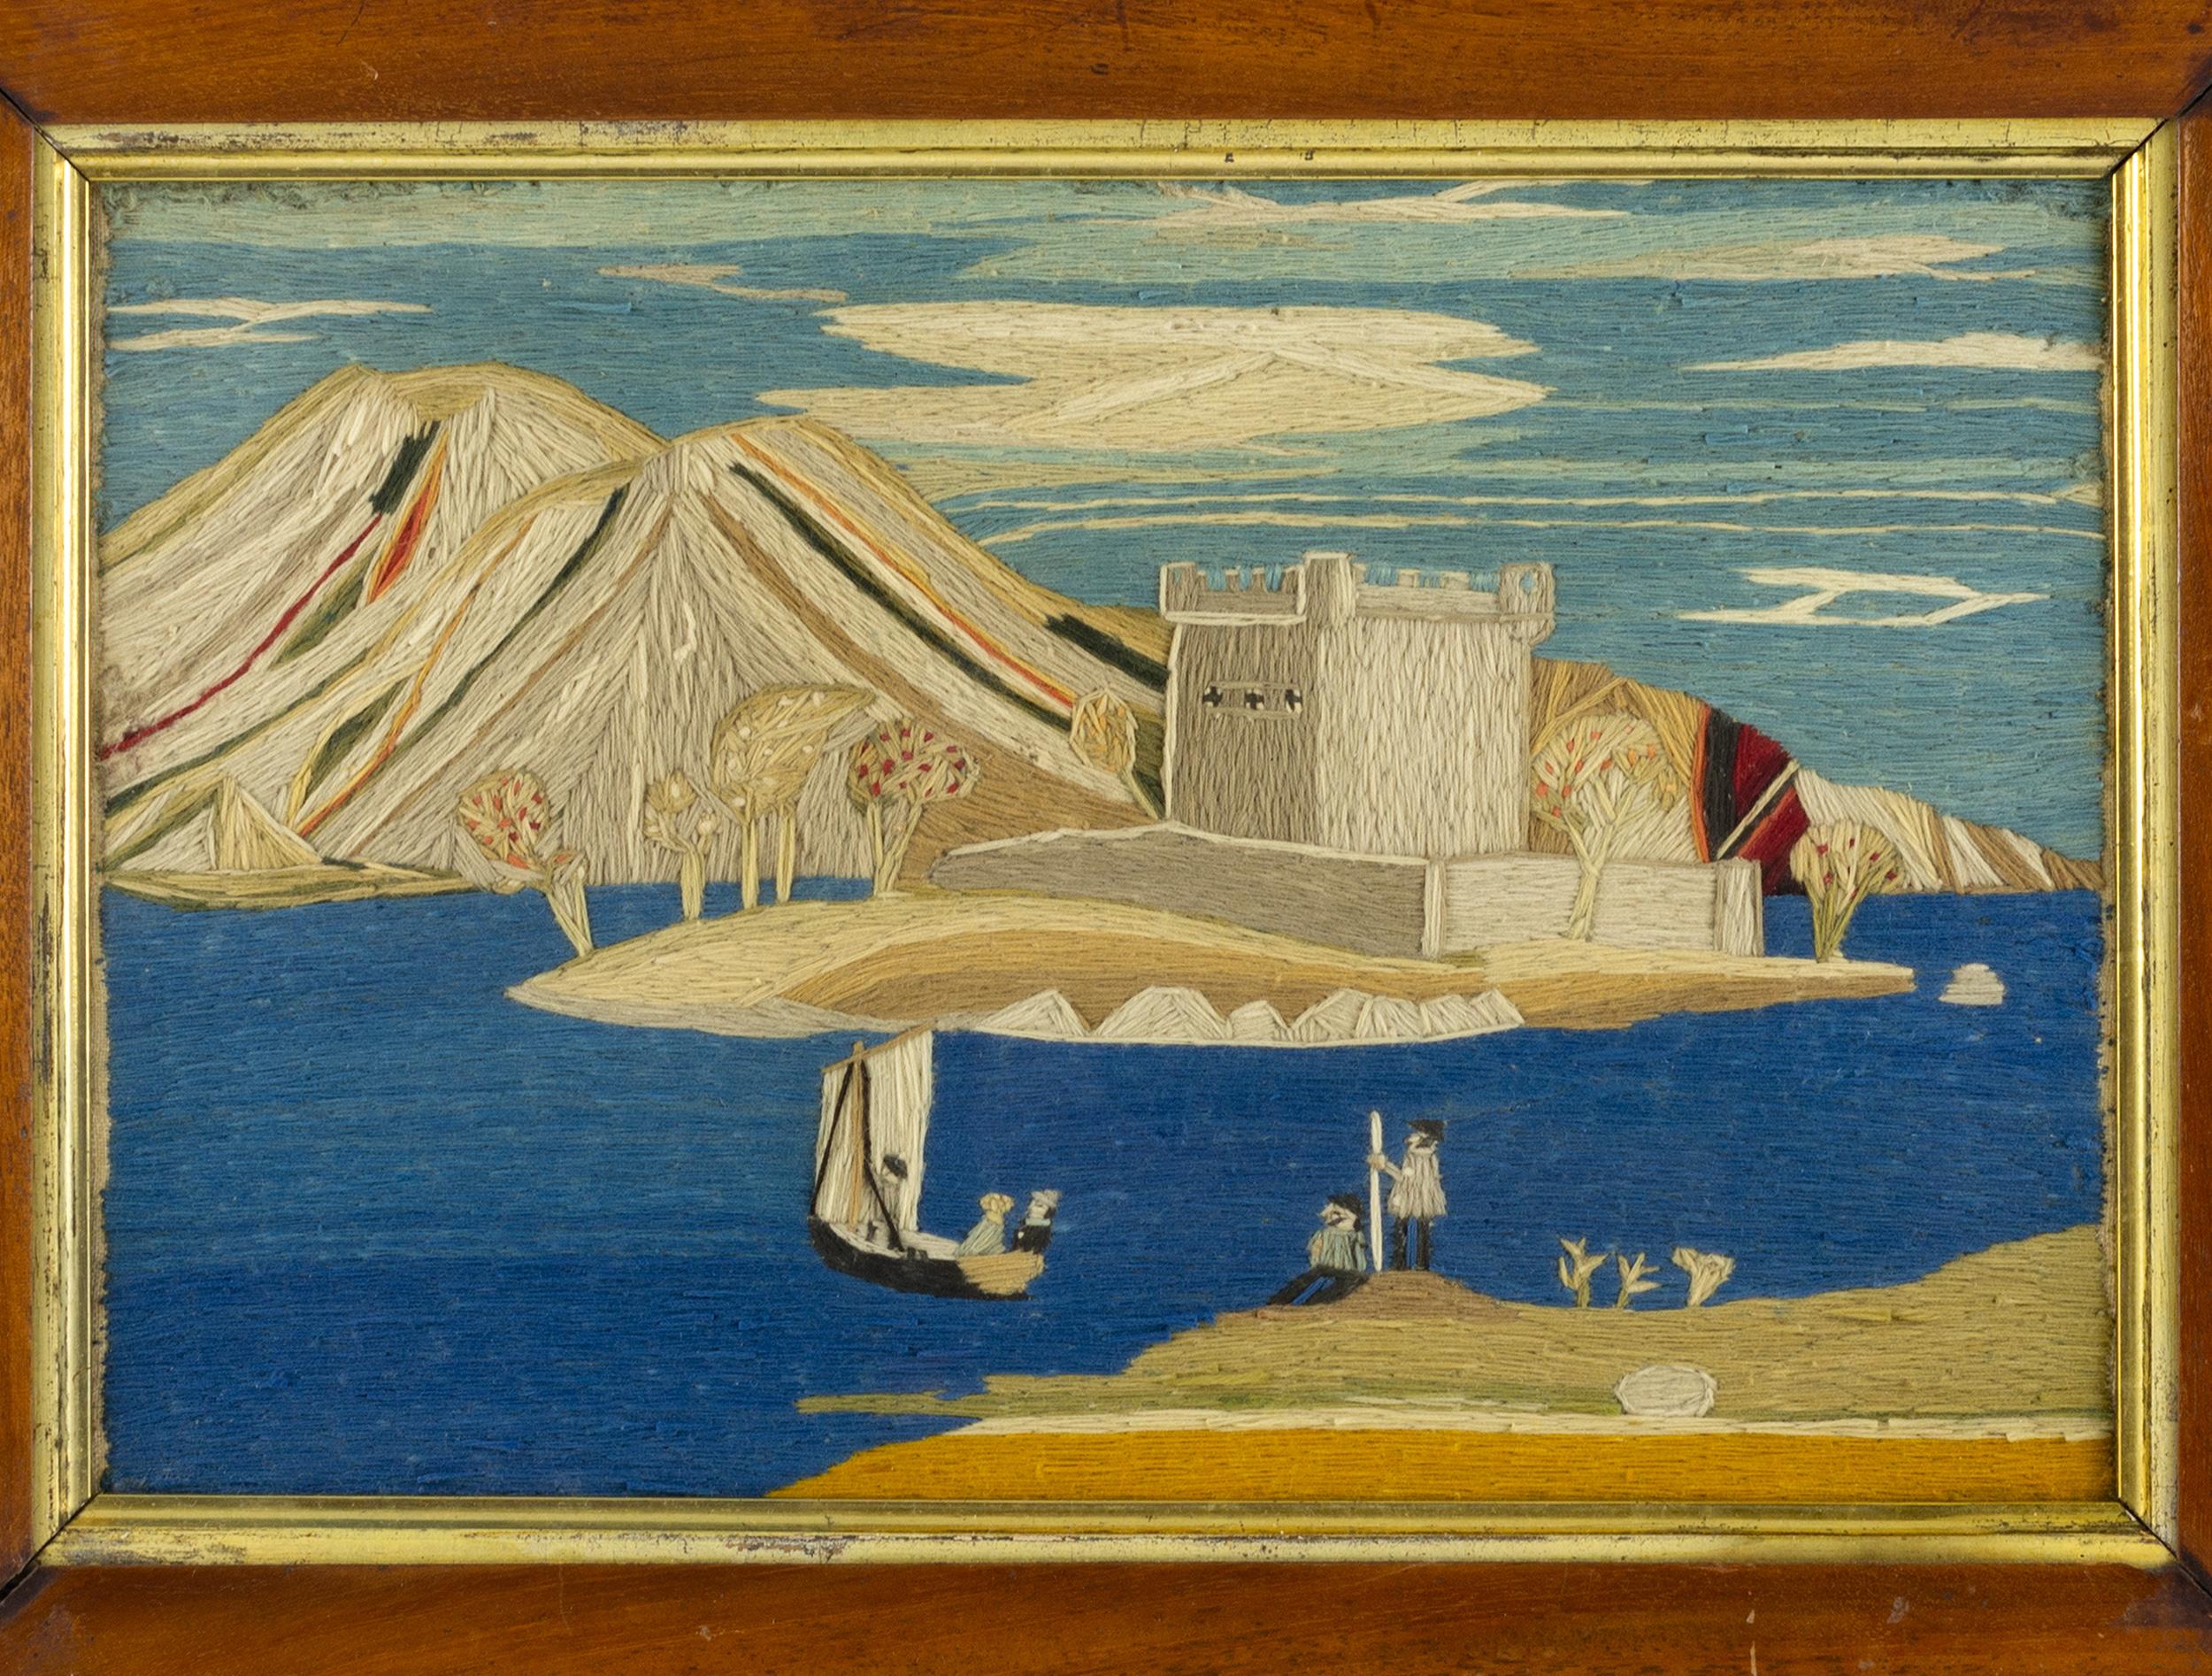 Woolie of a fort with a small catboat and two standing 
figures in the foreground,with trees and a mountainside 
in the background. Vivid with a good contrast and strong 
blue water. Framed in the original Mahogany with a lemon 
gold liner. English,